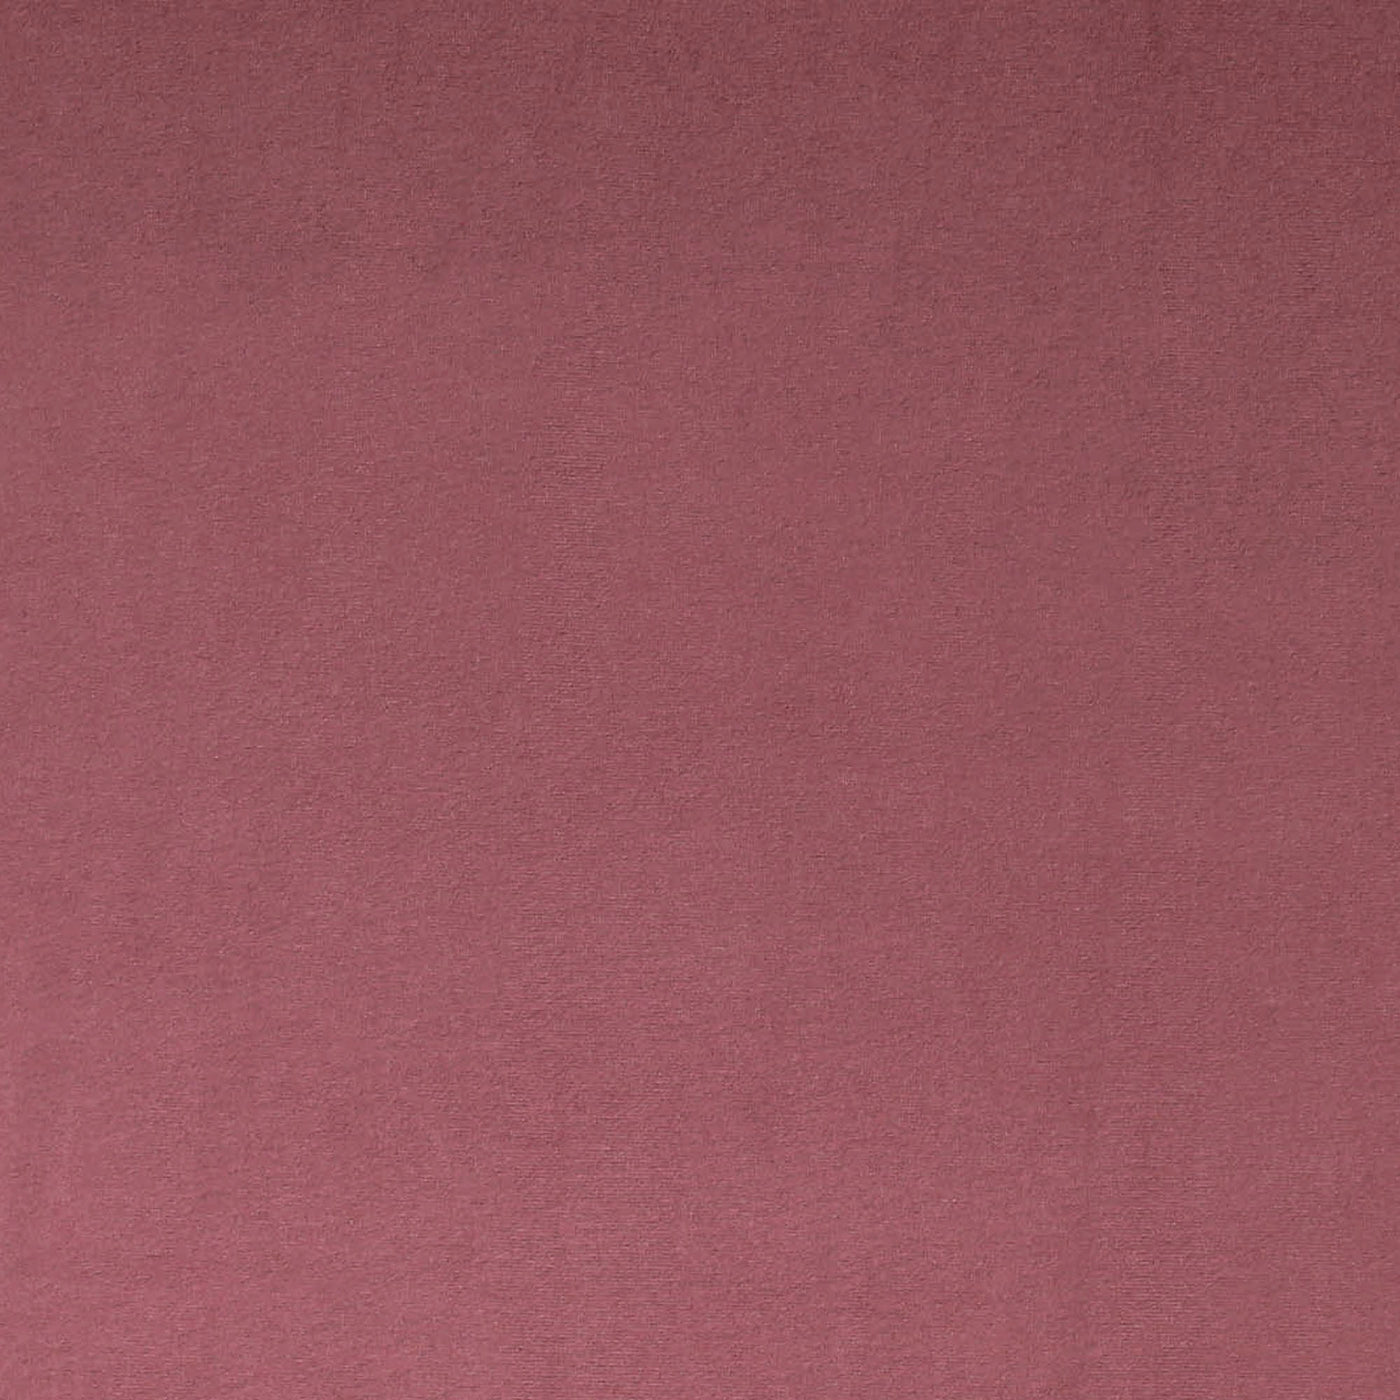 FabricLA | DTY Double Brushed Polyester Spandex Knit Fabric | Sold by the Yard | Shorts, pants, sleeveless blouses, T-shirts | Mauve - FabricLA.com